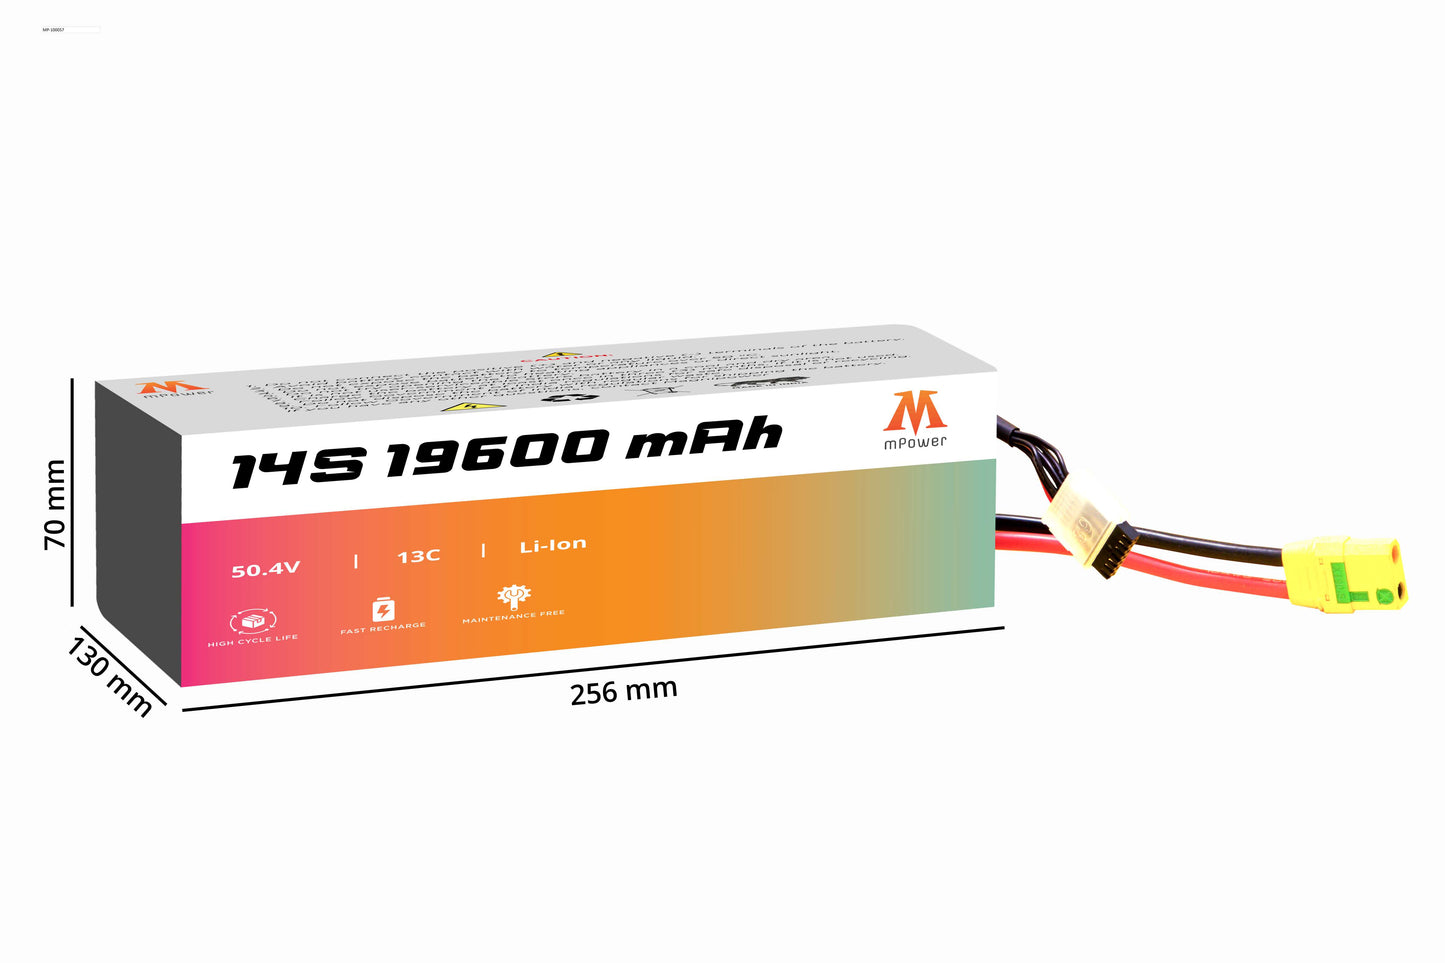 mPower 14S 19600mAh Lithium-Ion Battery for Survey Drones